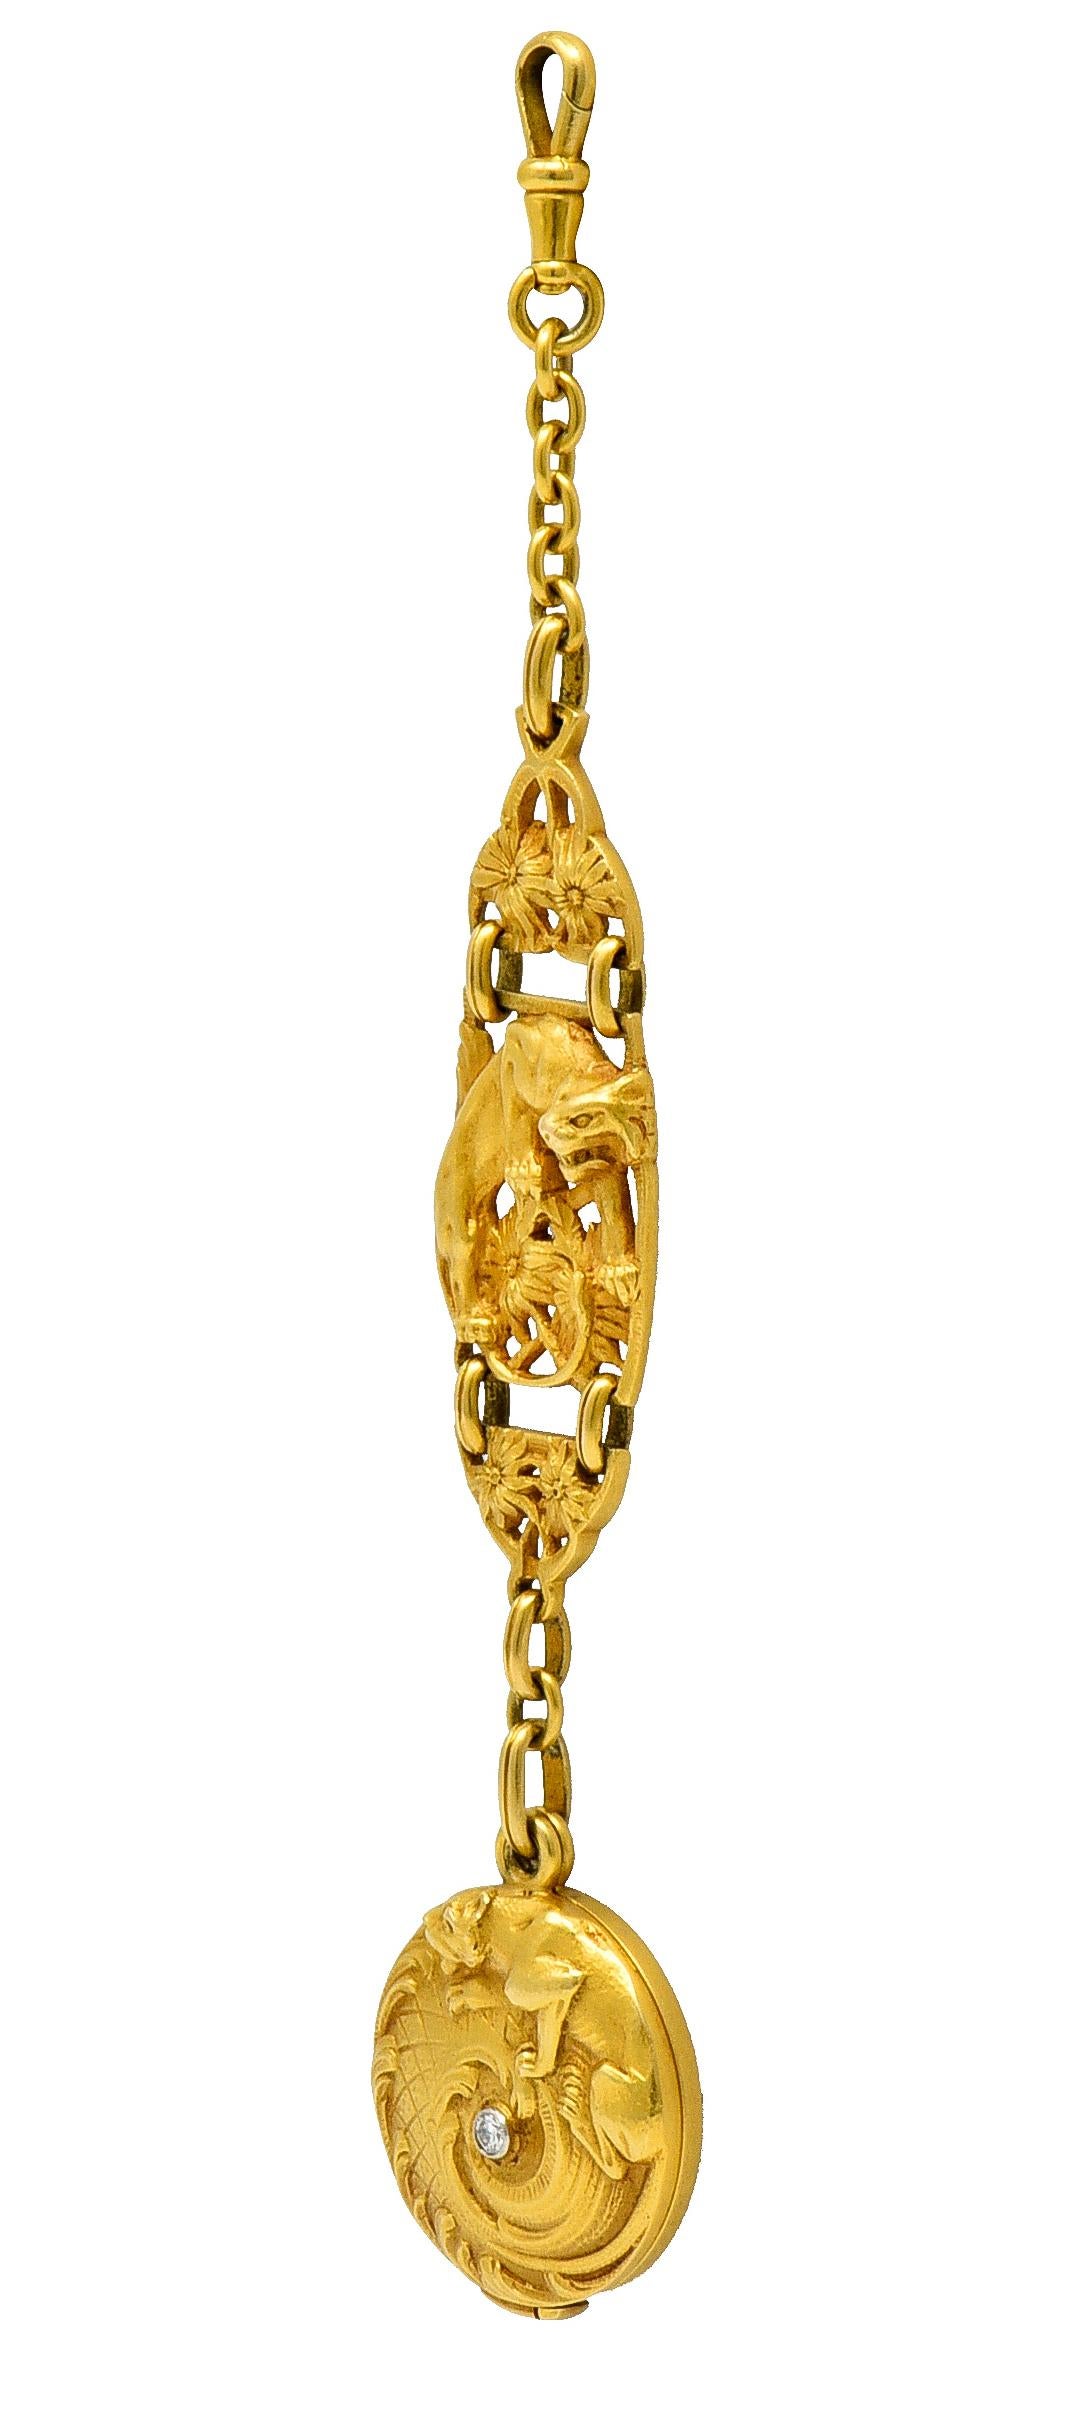 Long antique watch chain terminates as a circular locket; back is inscribed with monogram

It swivels open to reveal a plastic covered recess

Locket is highly rendered to depict a jaguar climbing scrolled foliate whiplash

Centering a bezel set